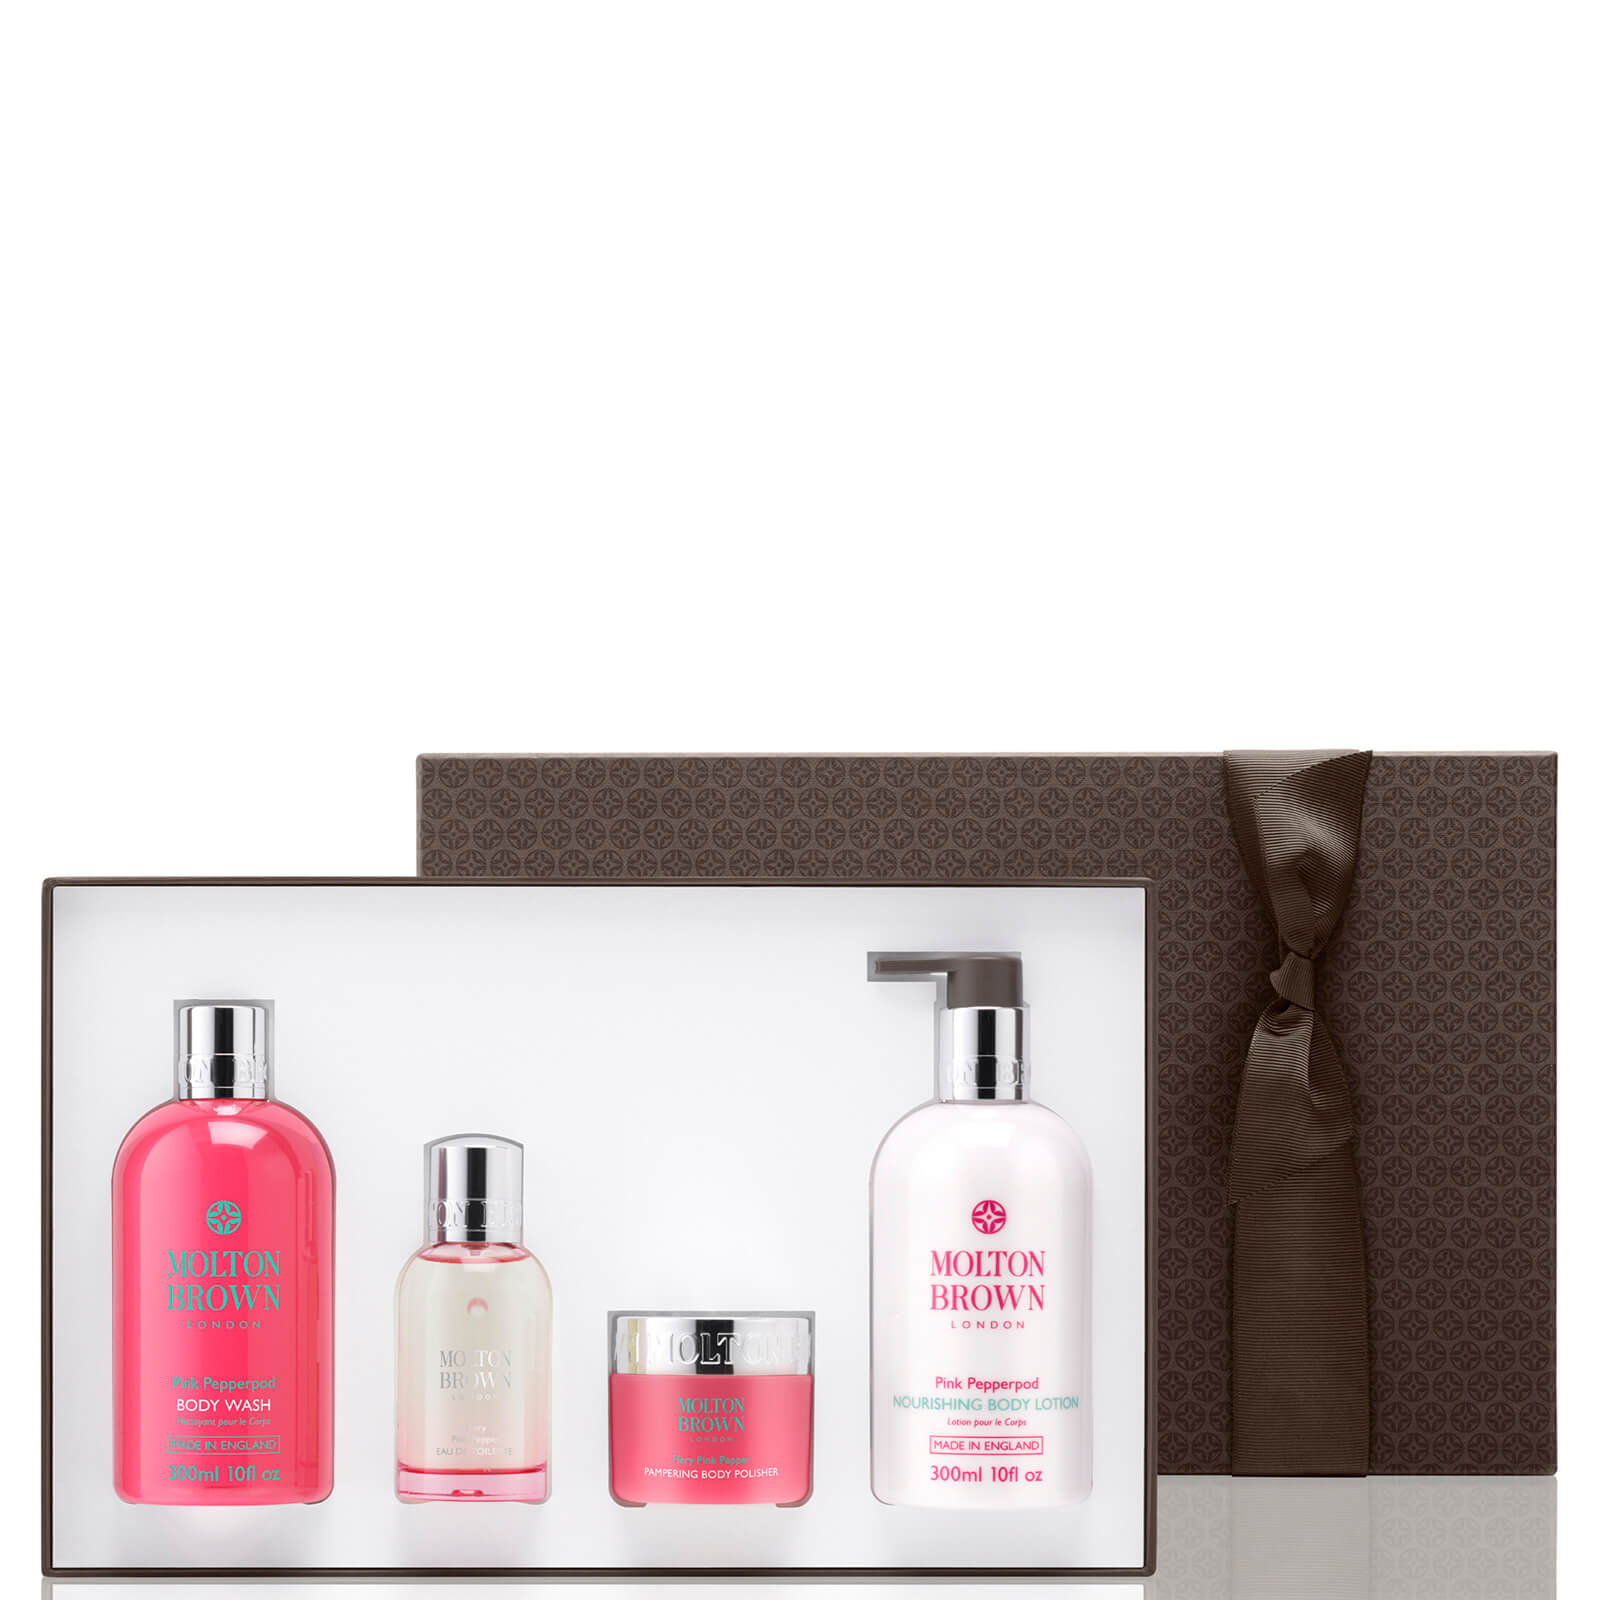 Molton Brown Fiery Pink Pepper Pampering Body Gift Set